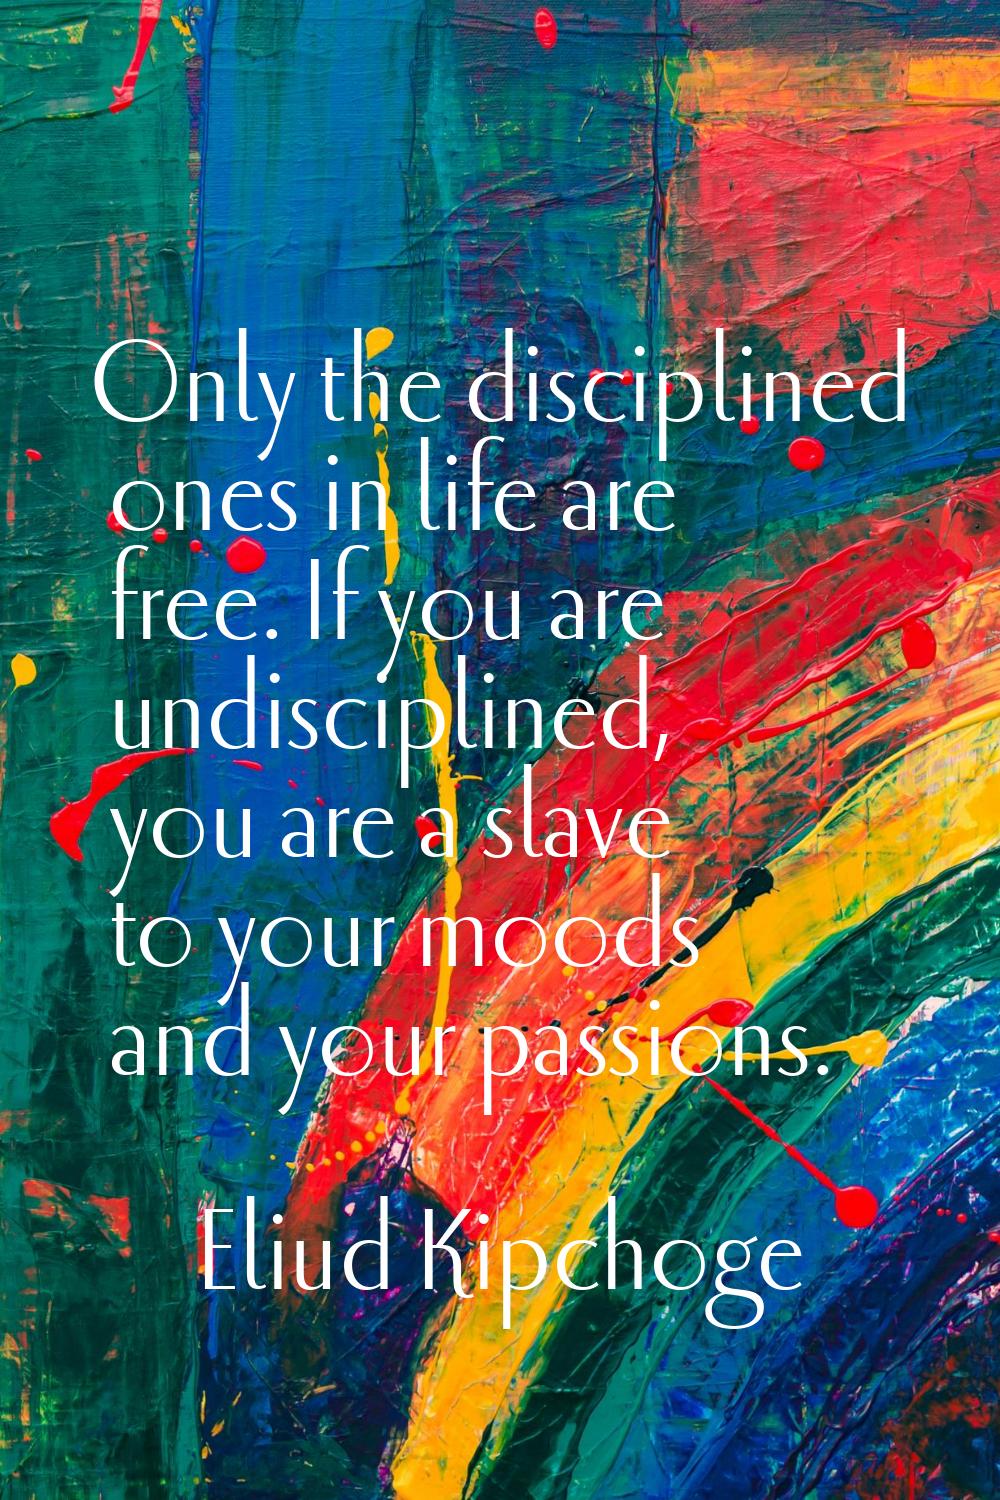 Only the disciplined ones in life are free. If you are undisciplined, you are a slave to your moods